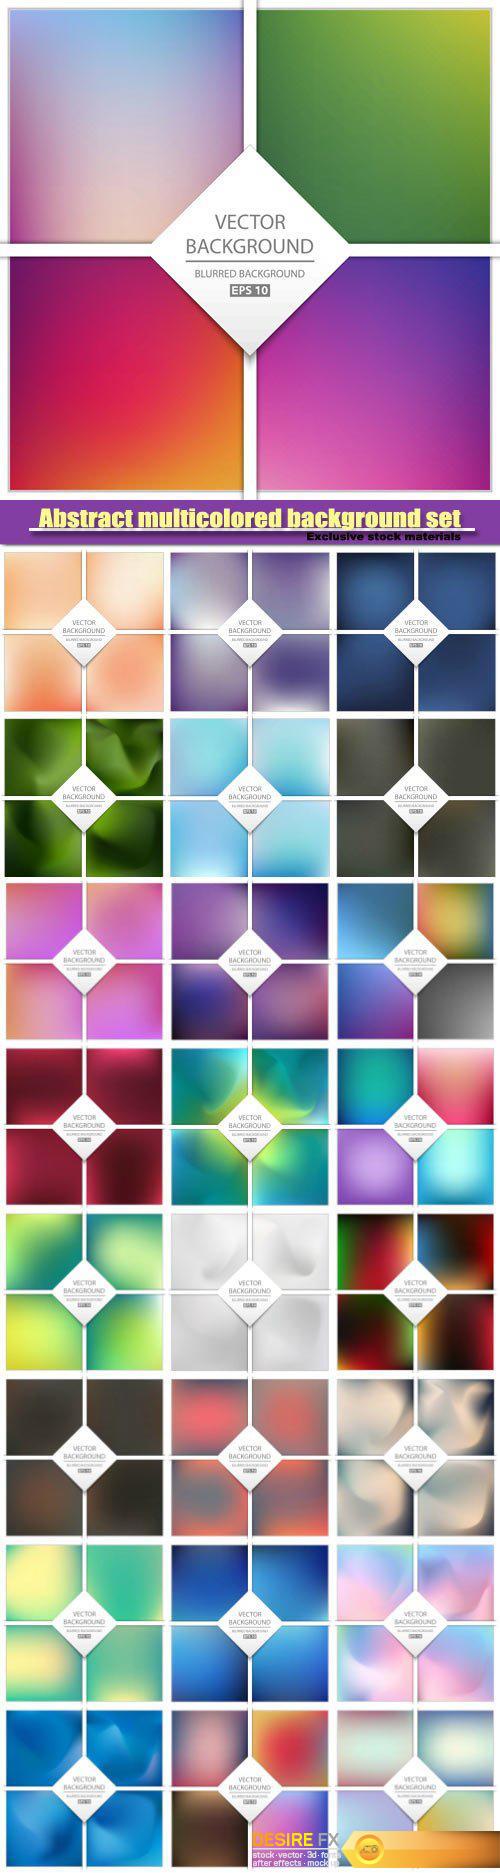 Abstract vector multicolored blurred background set